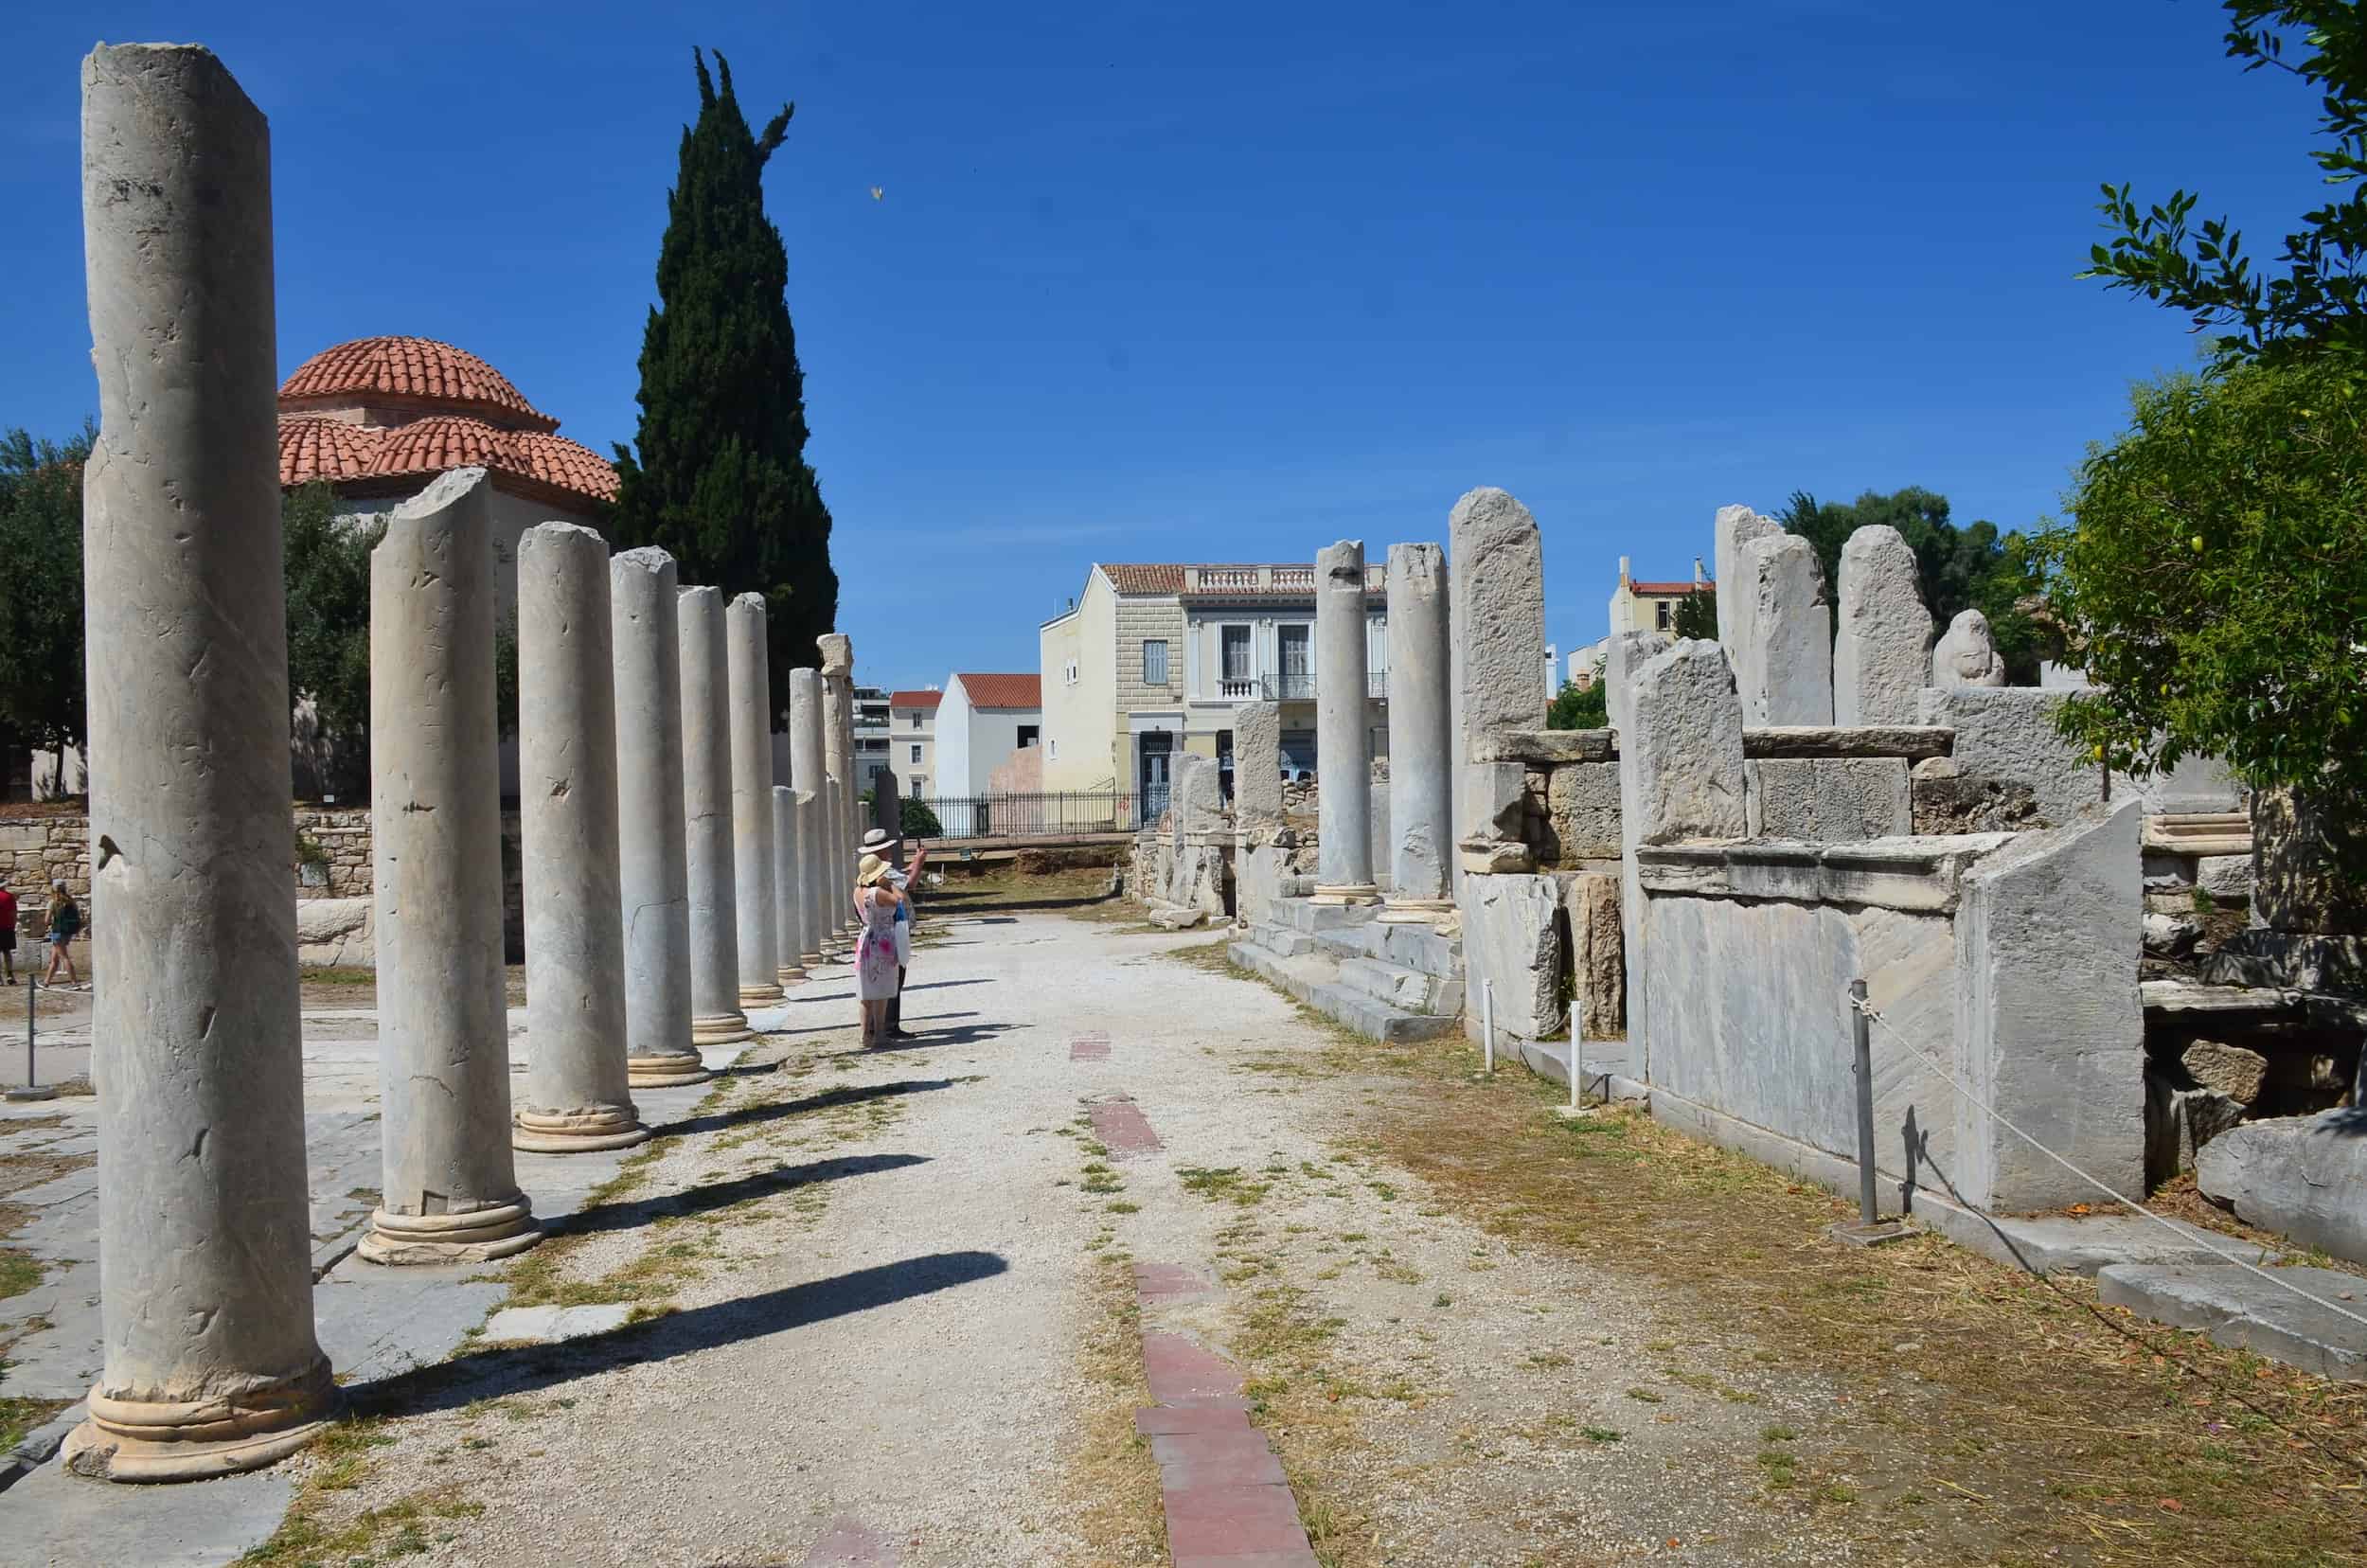 Eastern portico of the Roman Agora in Athens, Greece